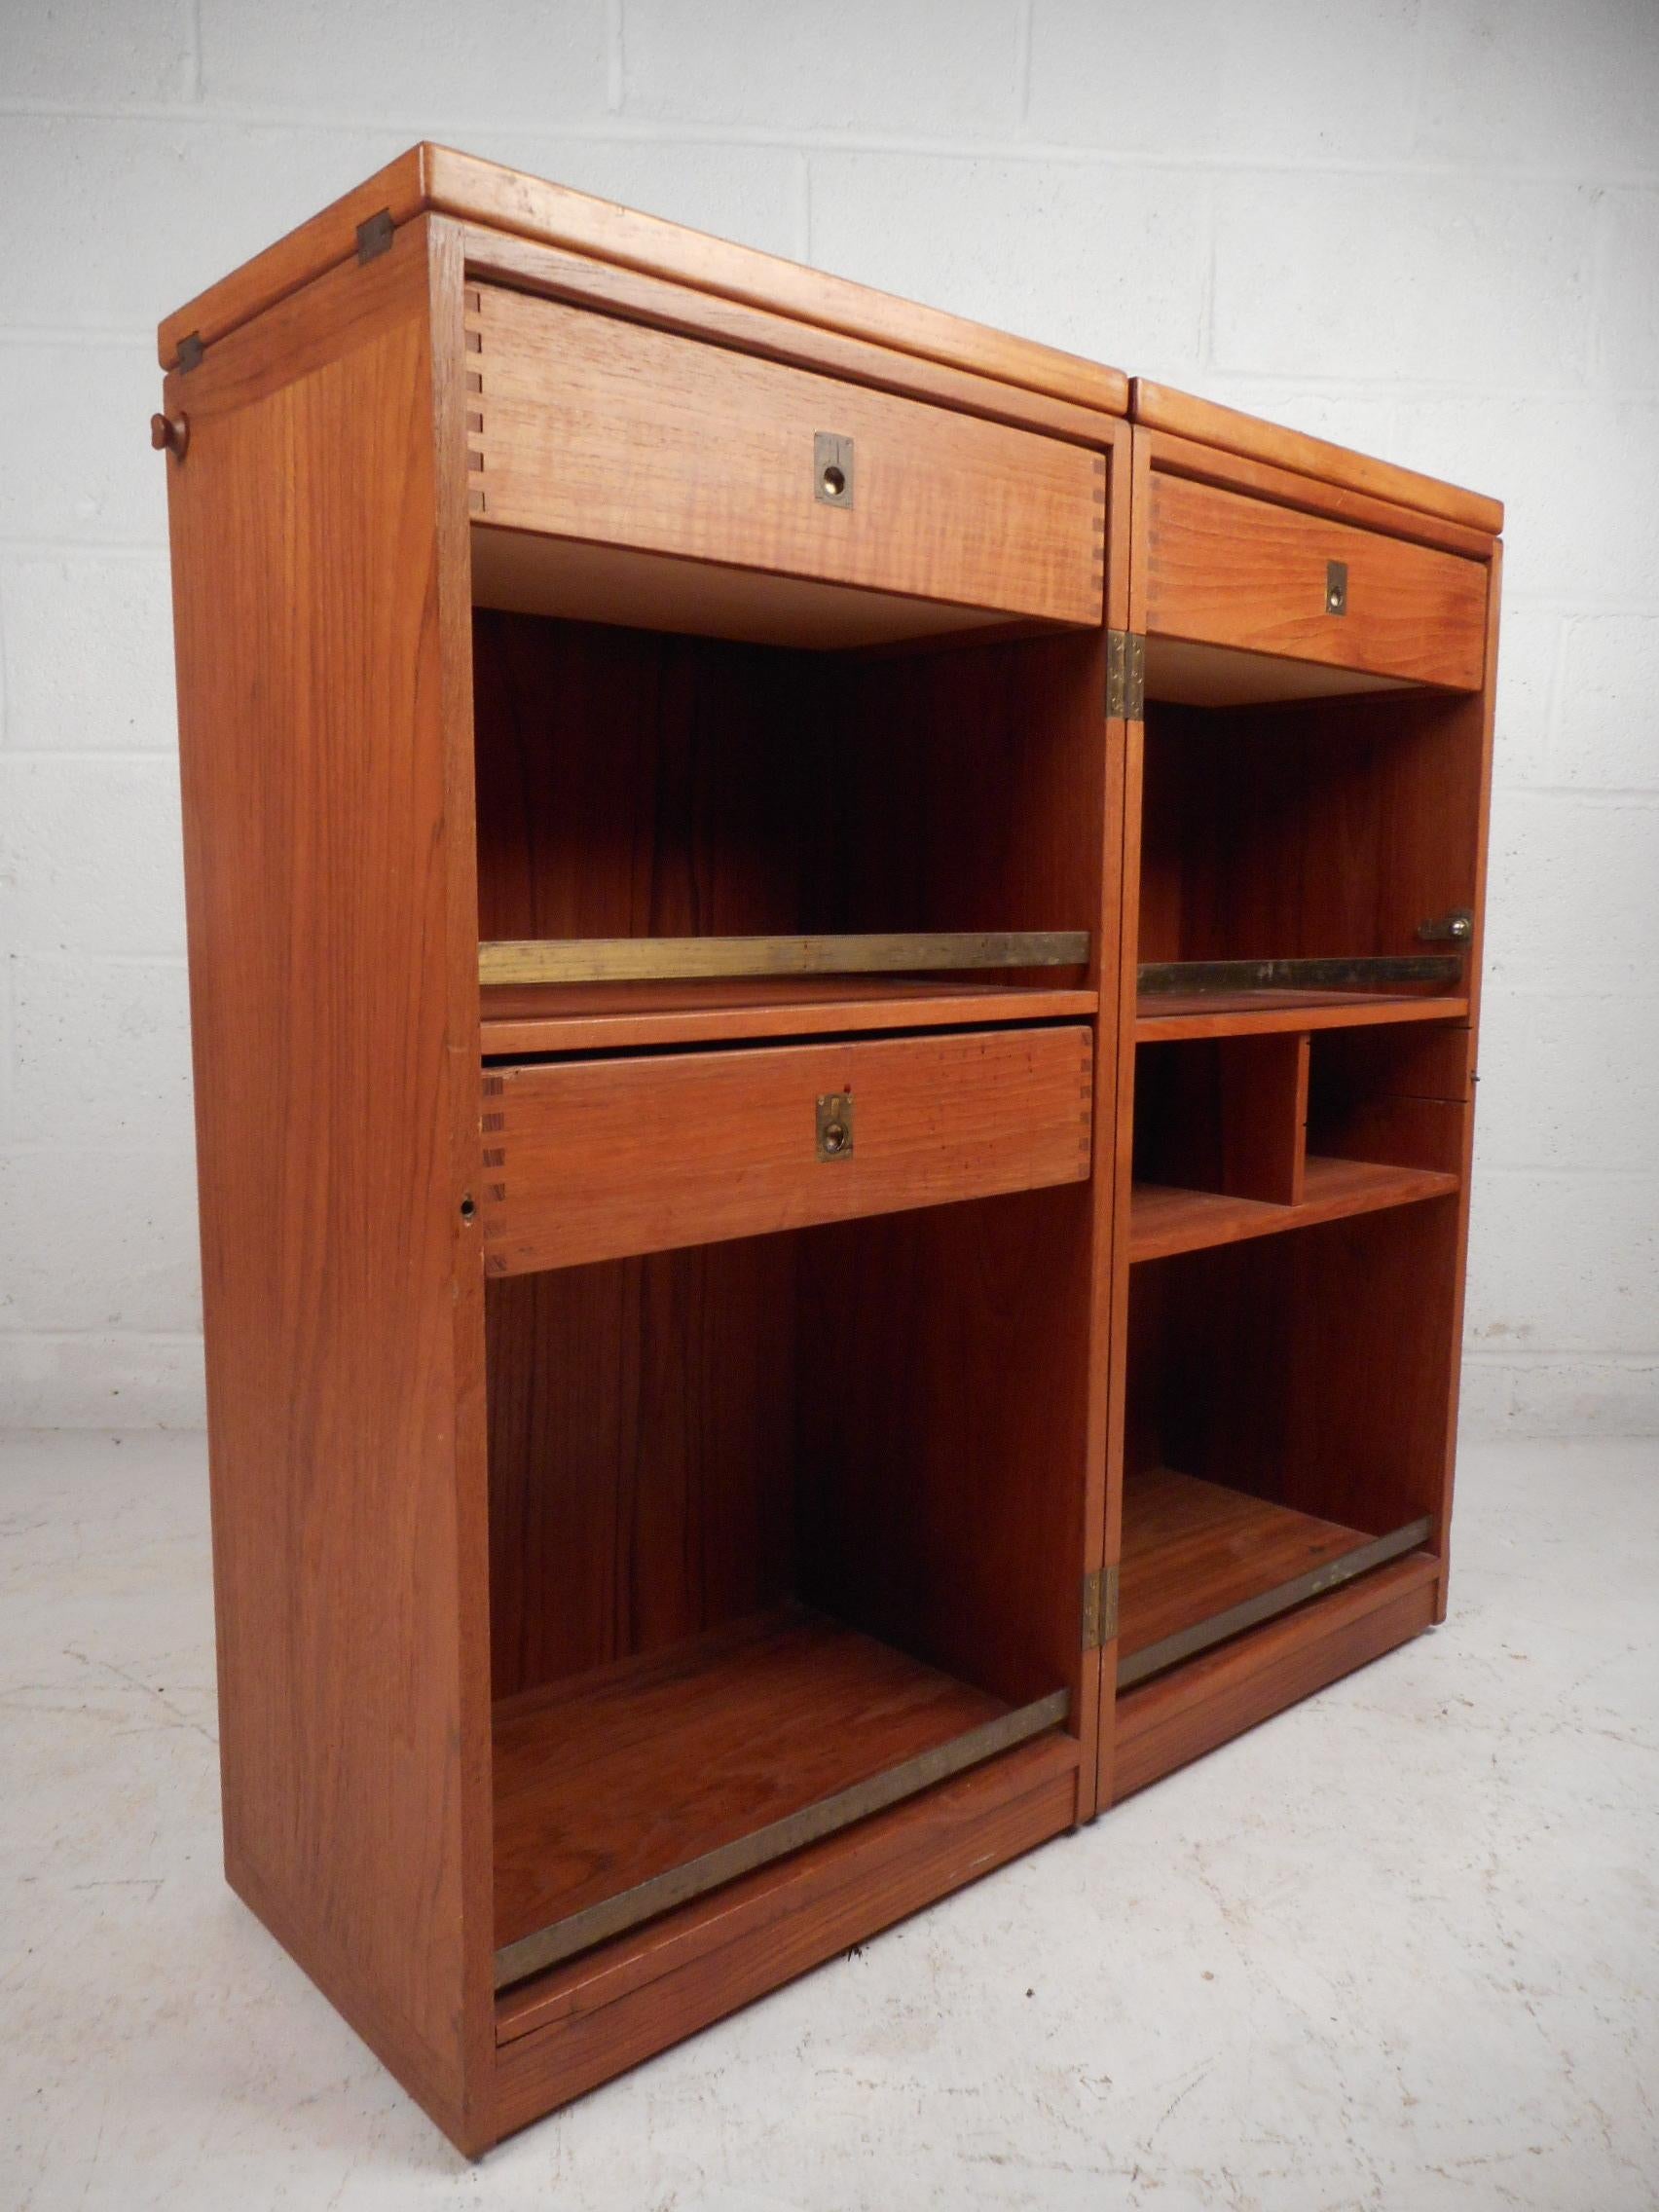 Stunning Danish dry bar designed by Reno Wahl Iversen, made in Denmark, circa 1960s. Great design featuring felt-lined drawers complete with dovetail jointing, various compartments with brass stretchers securing their contents, and hinged panels on